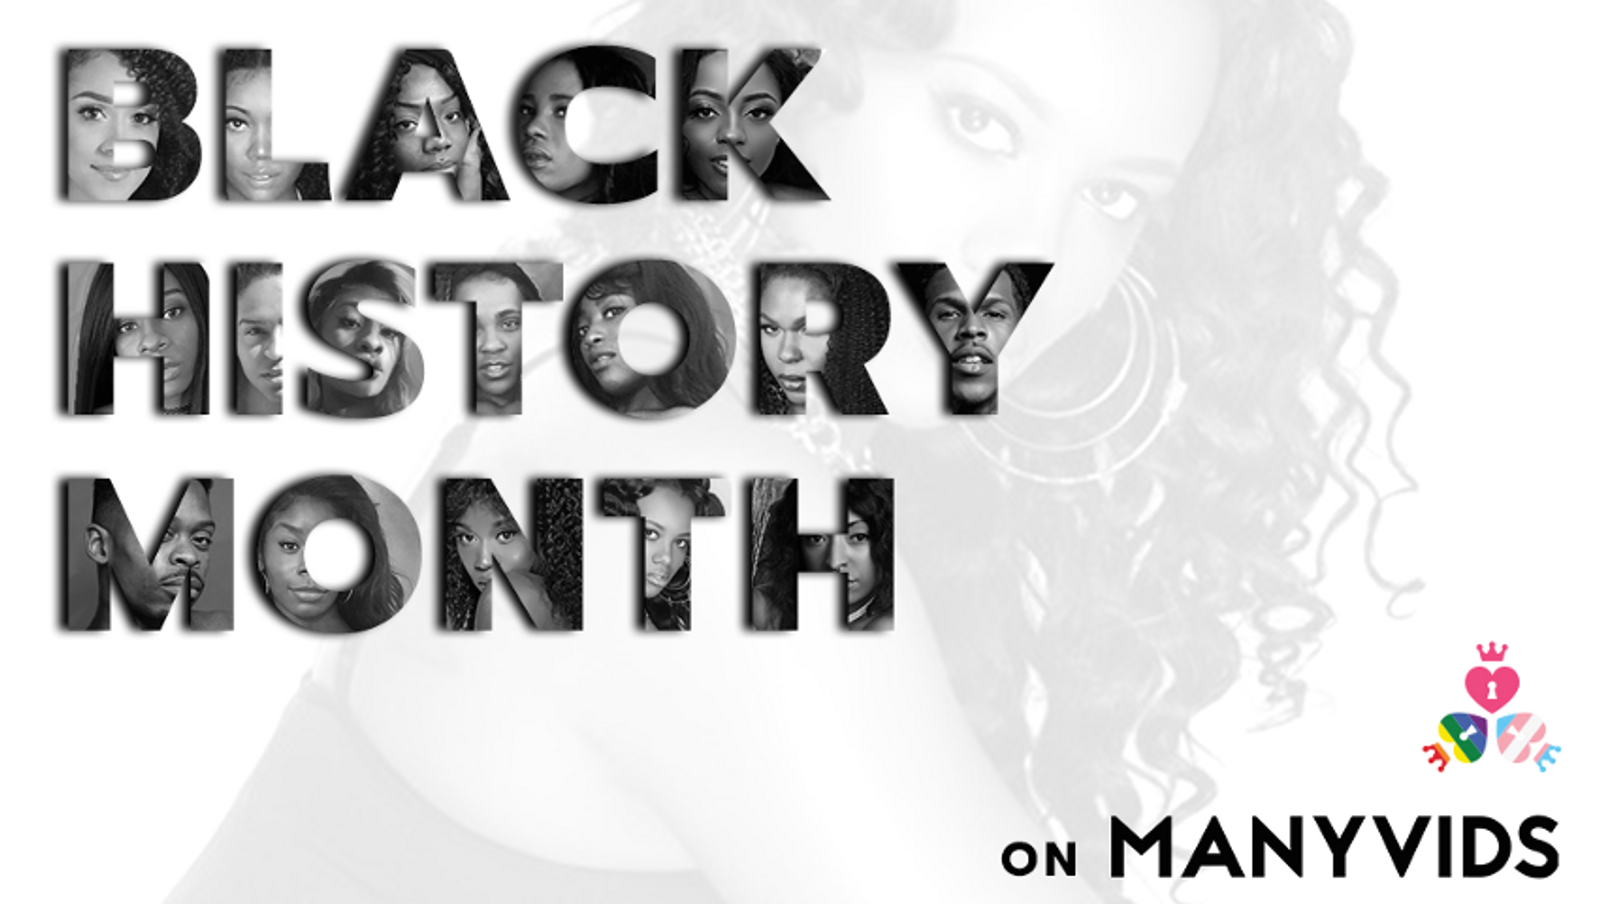 ManyVids Honors Black History Month in New Video